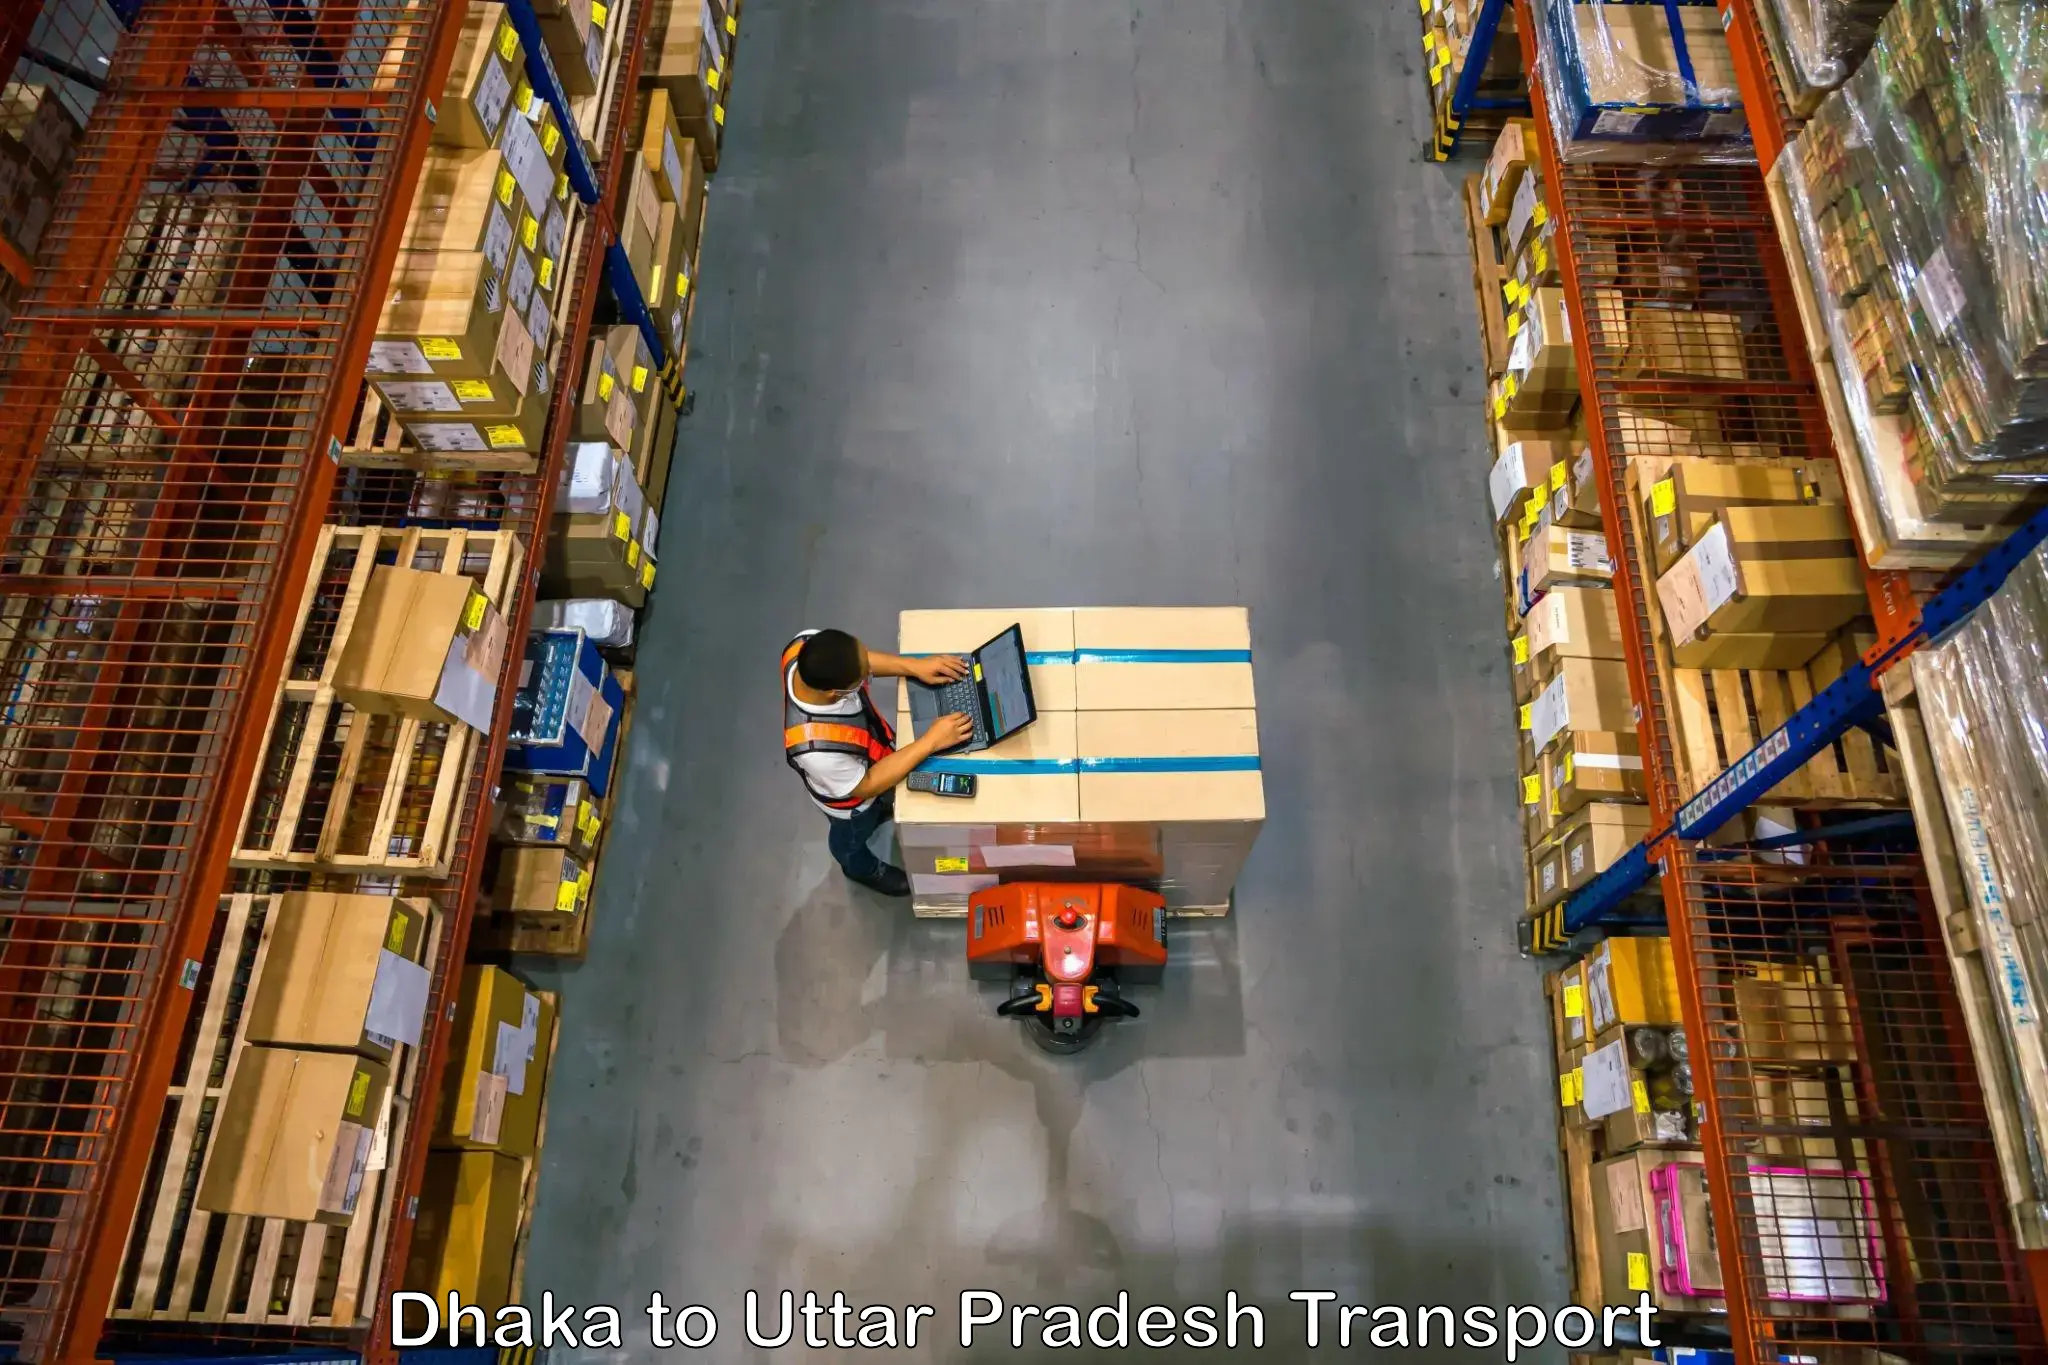 Air freight transport services Dhaka to Chitrakoot